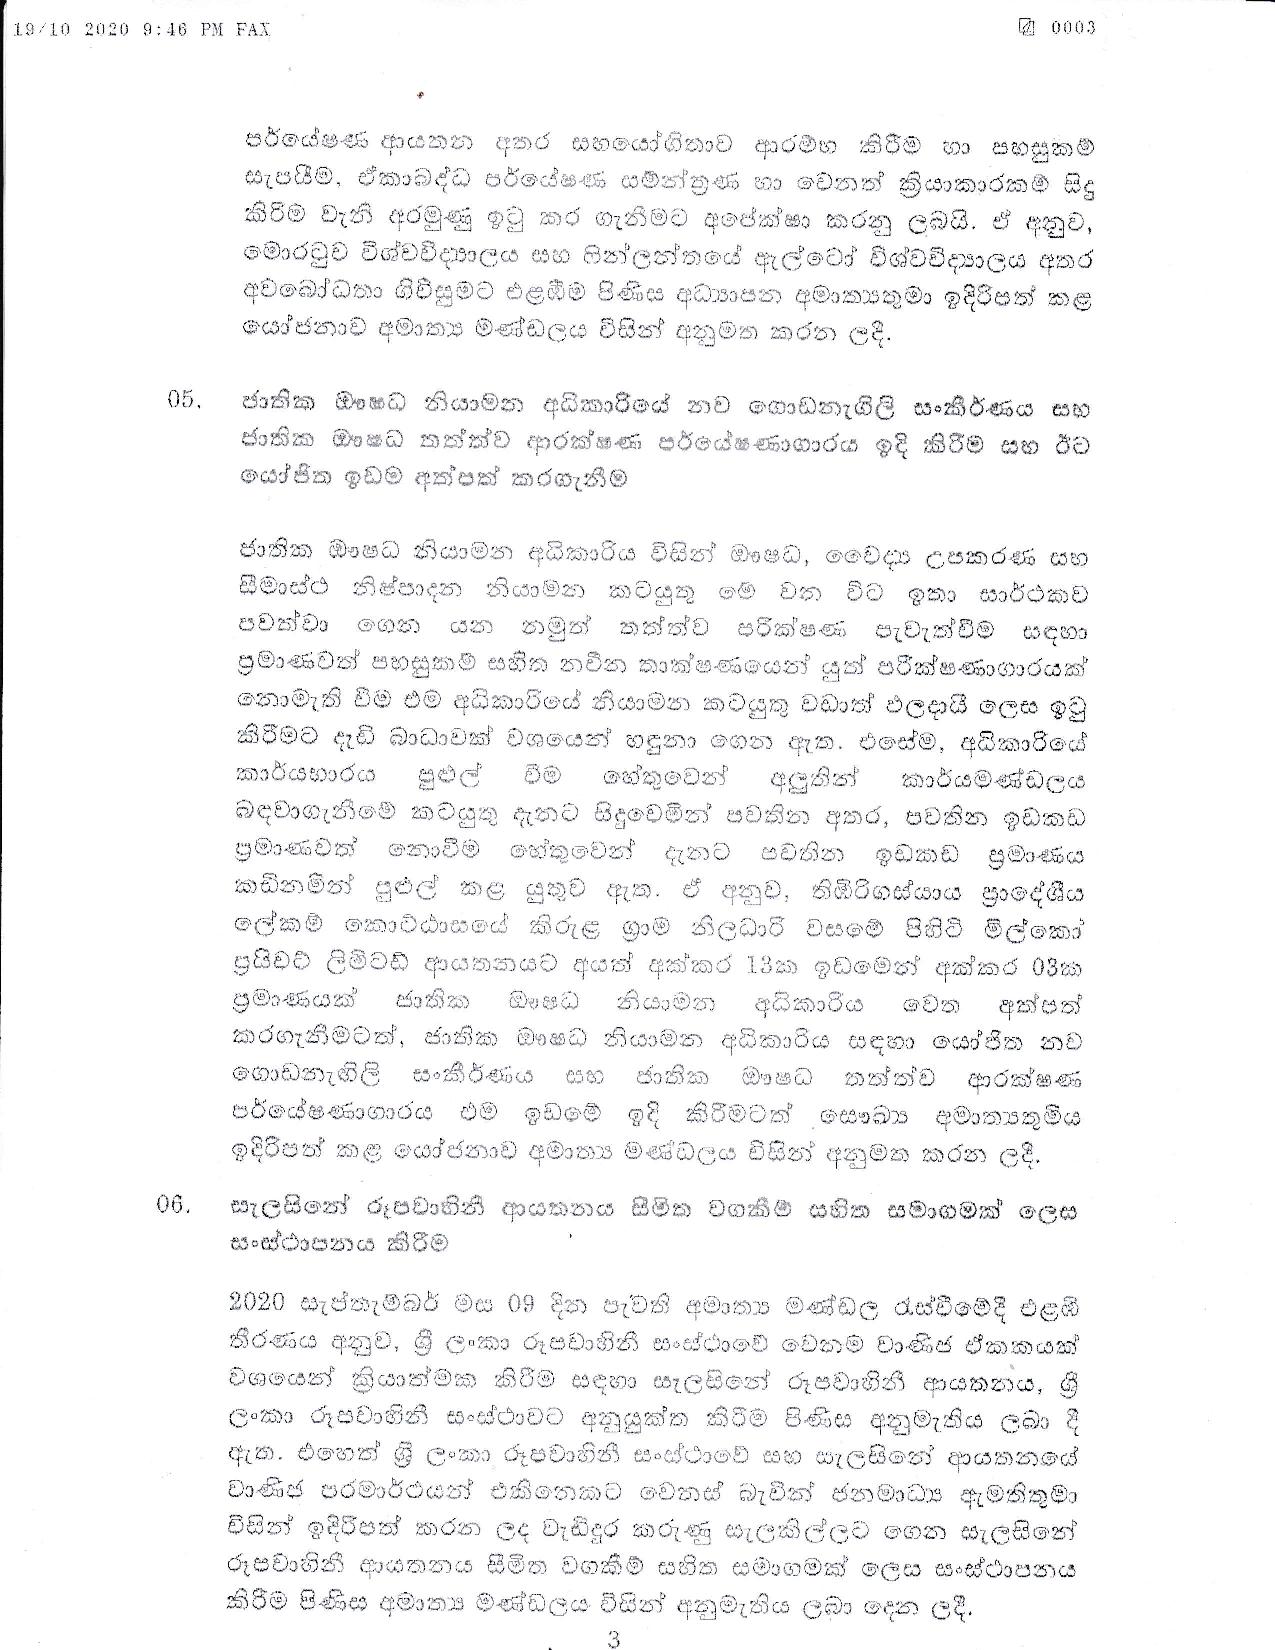 Cabinet Decision on 19.10.2020 page 003